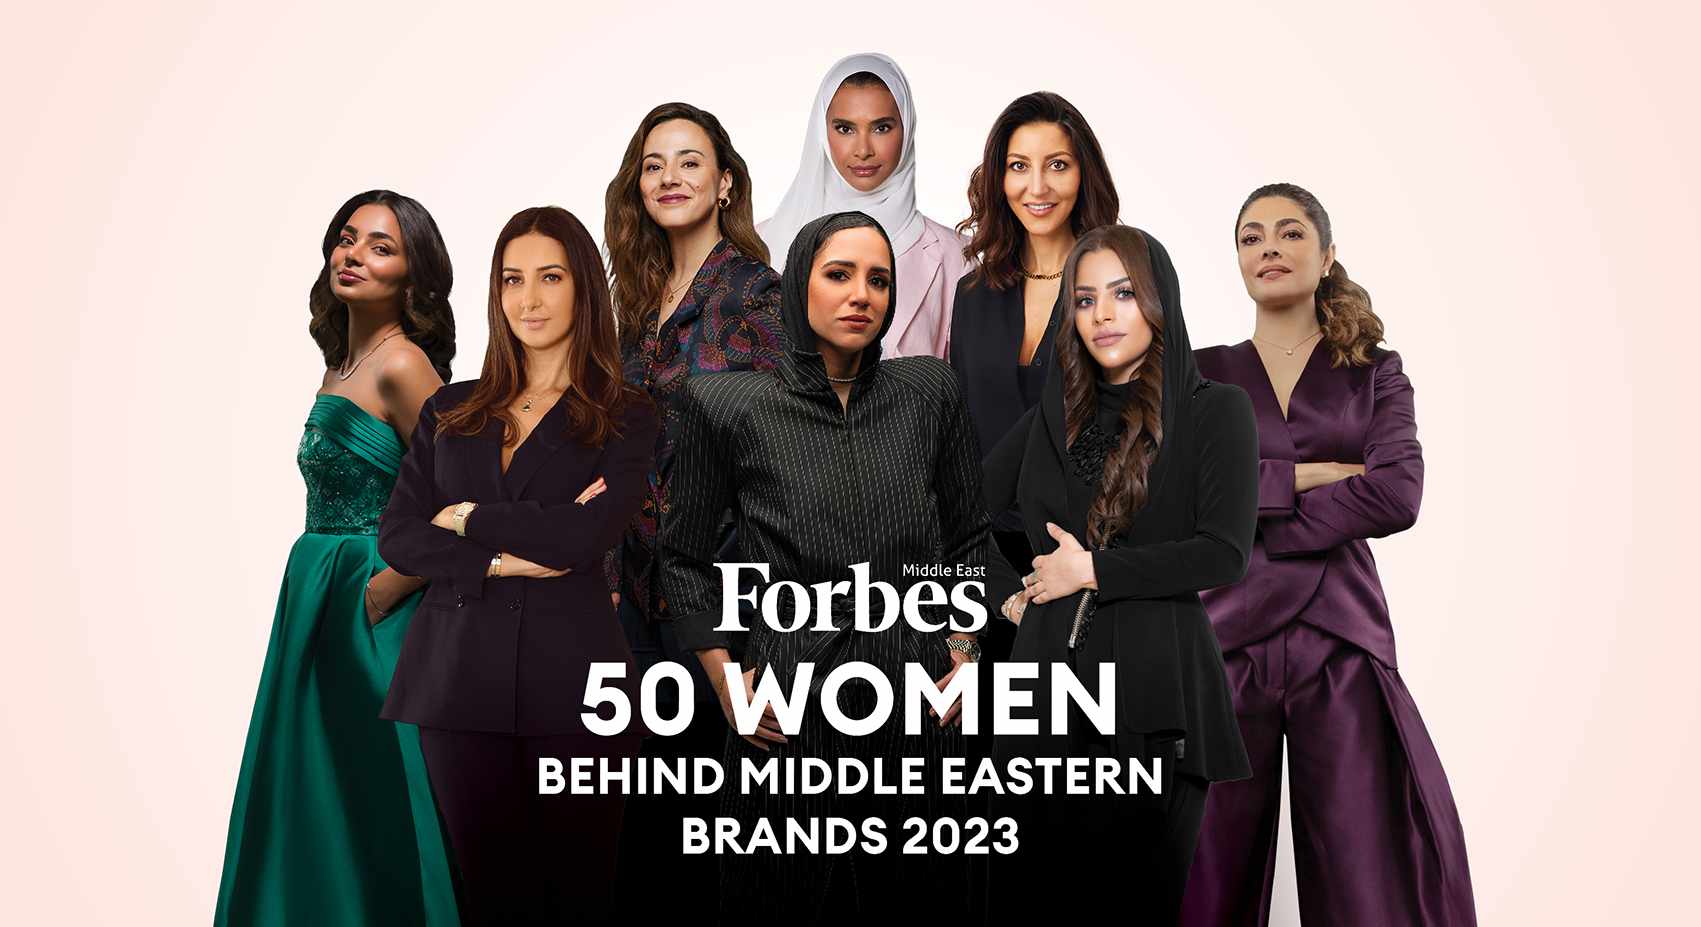 middle,east,women,middle east,brands